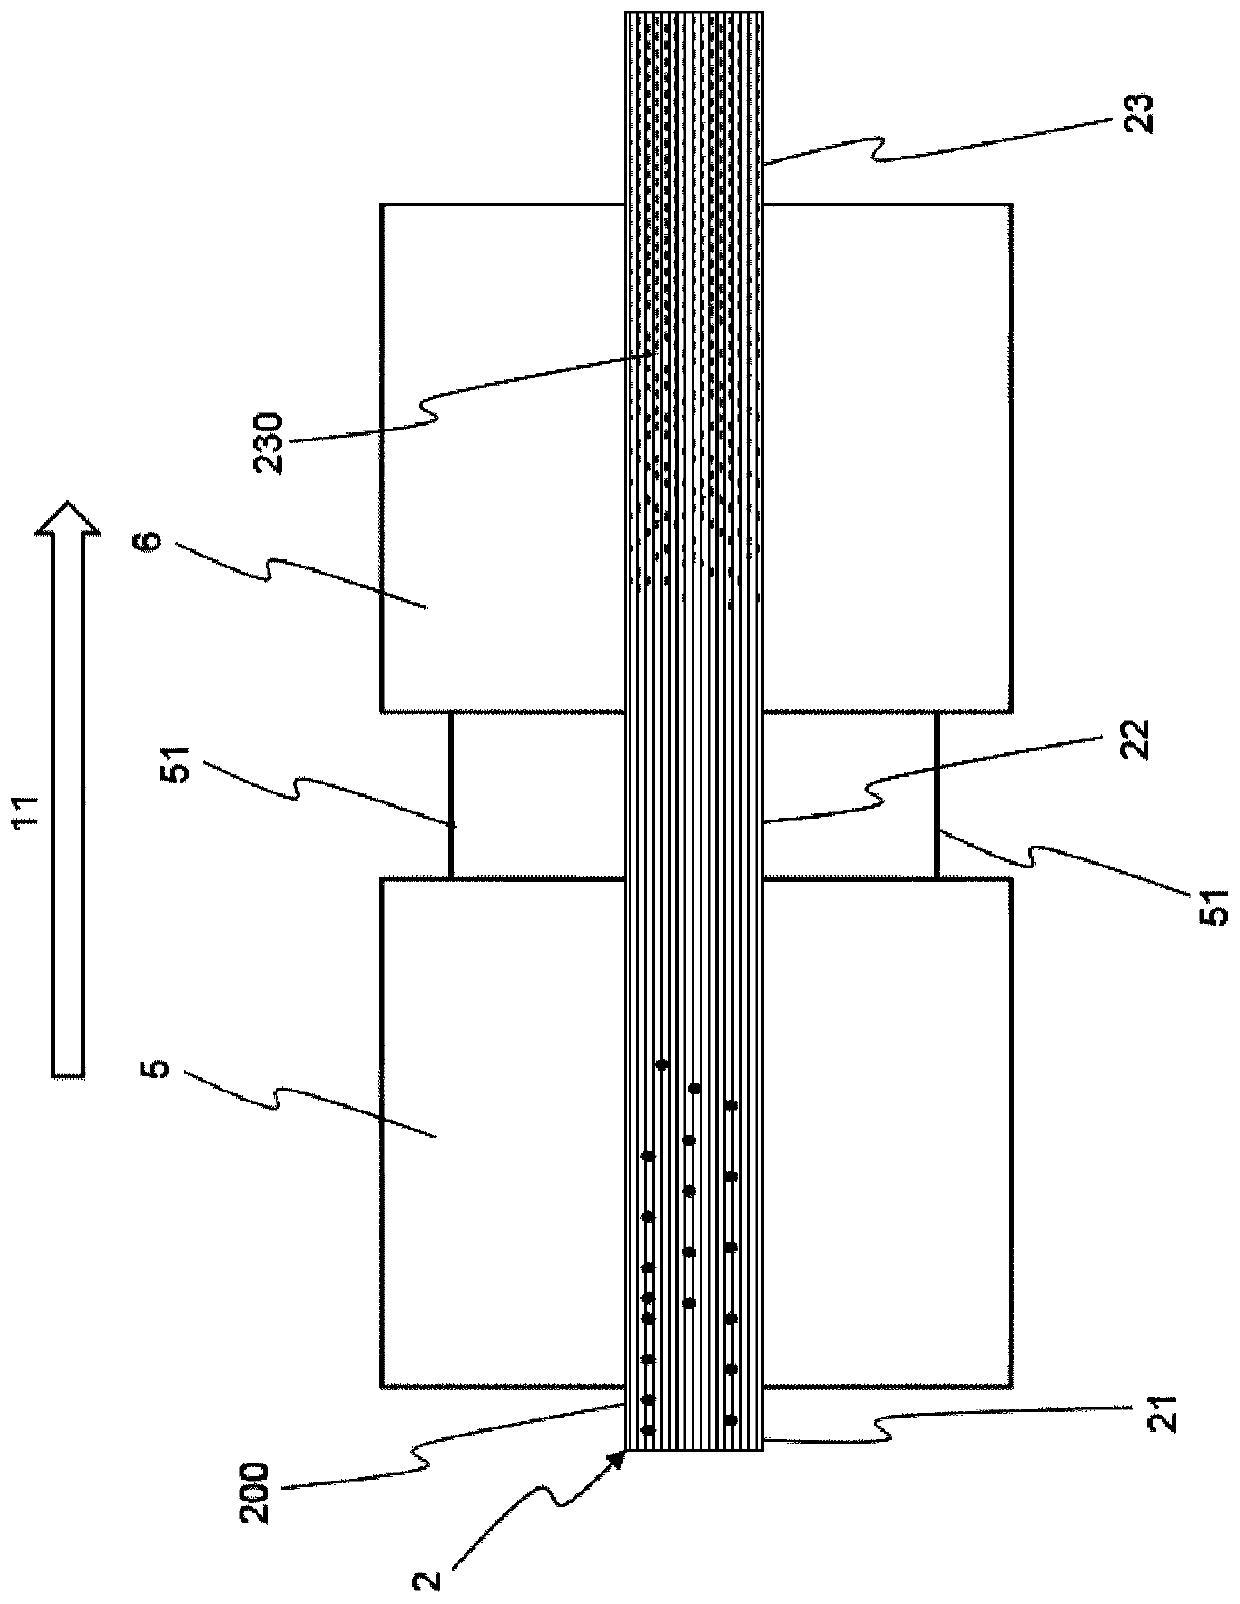 Pultrusion process and arrangement for the continuous production of blanks from a fibre-plastic composite material